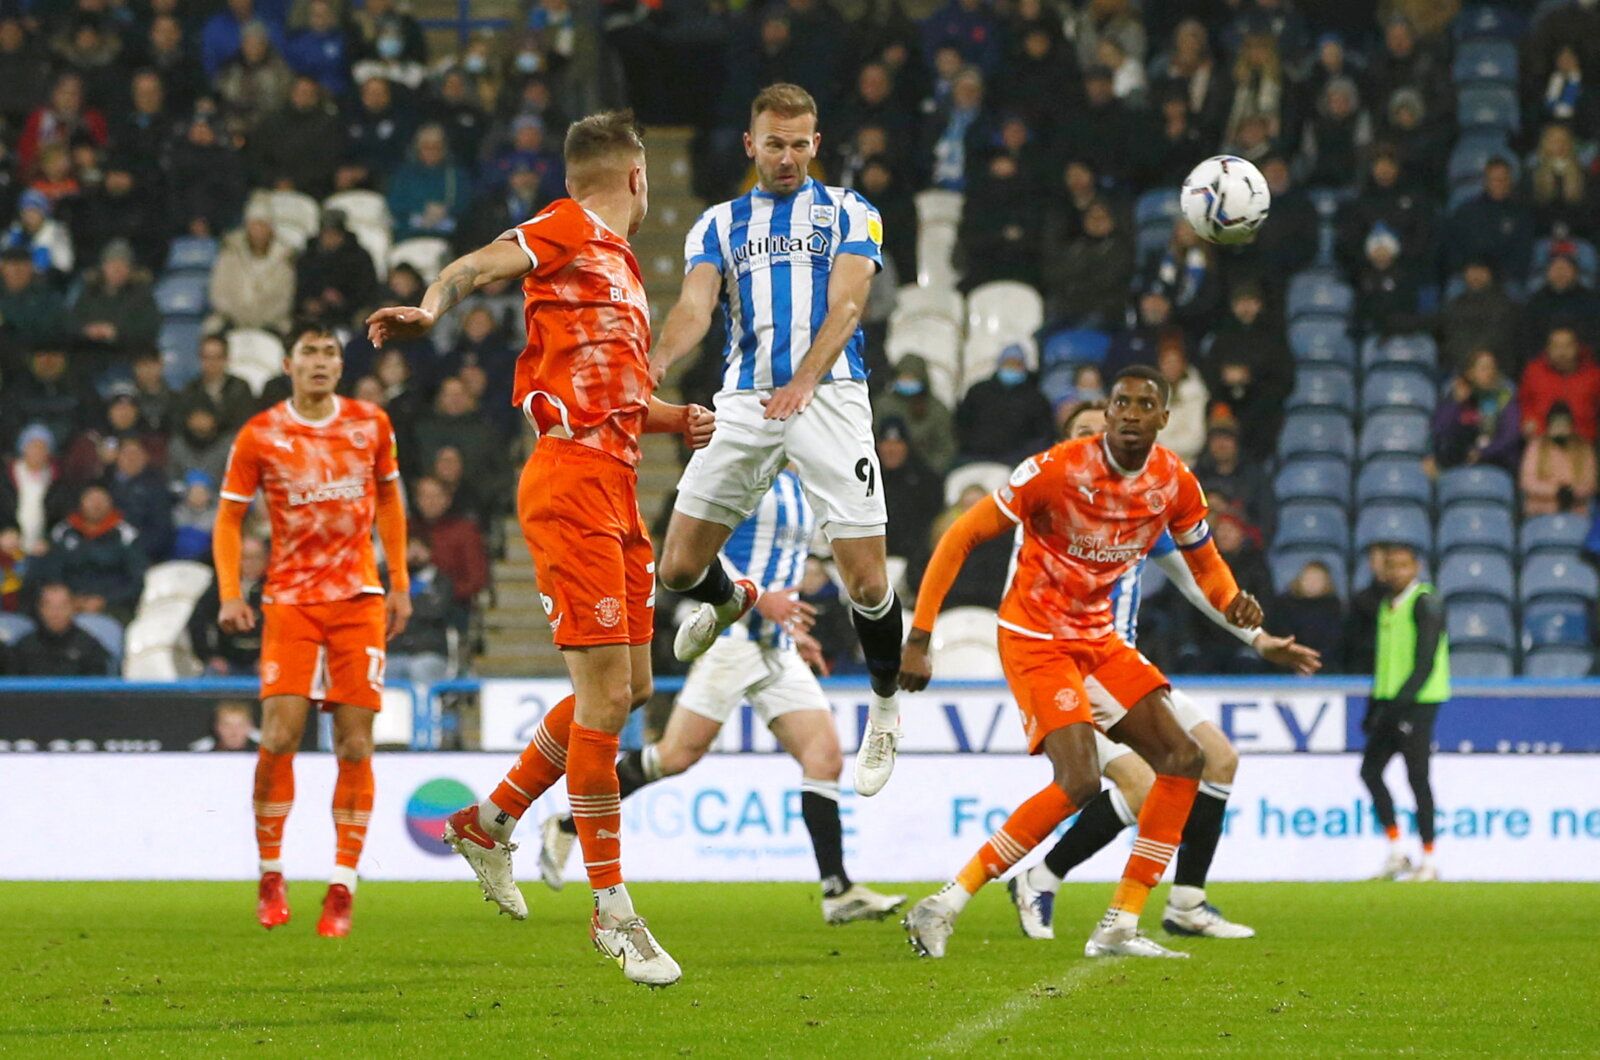 Soccer Football - Championship - Huddersfield Town v Blackpool - John Smith's Stadium, Huddersfield, Britain - December 26, 2021 Huddersfield Town's Jordan Rhodes scores a disallowed goal   Action Images via Reuters/Ed Sykes  EDITORIAL USE ONLY. No use with unauthorized audio, video, data, fixture lists, club/league logos or 